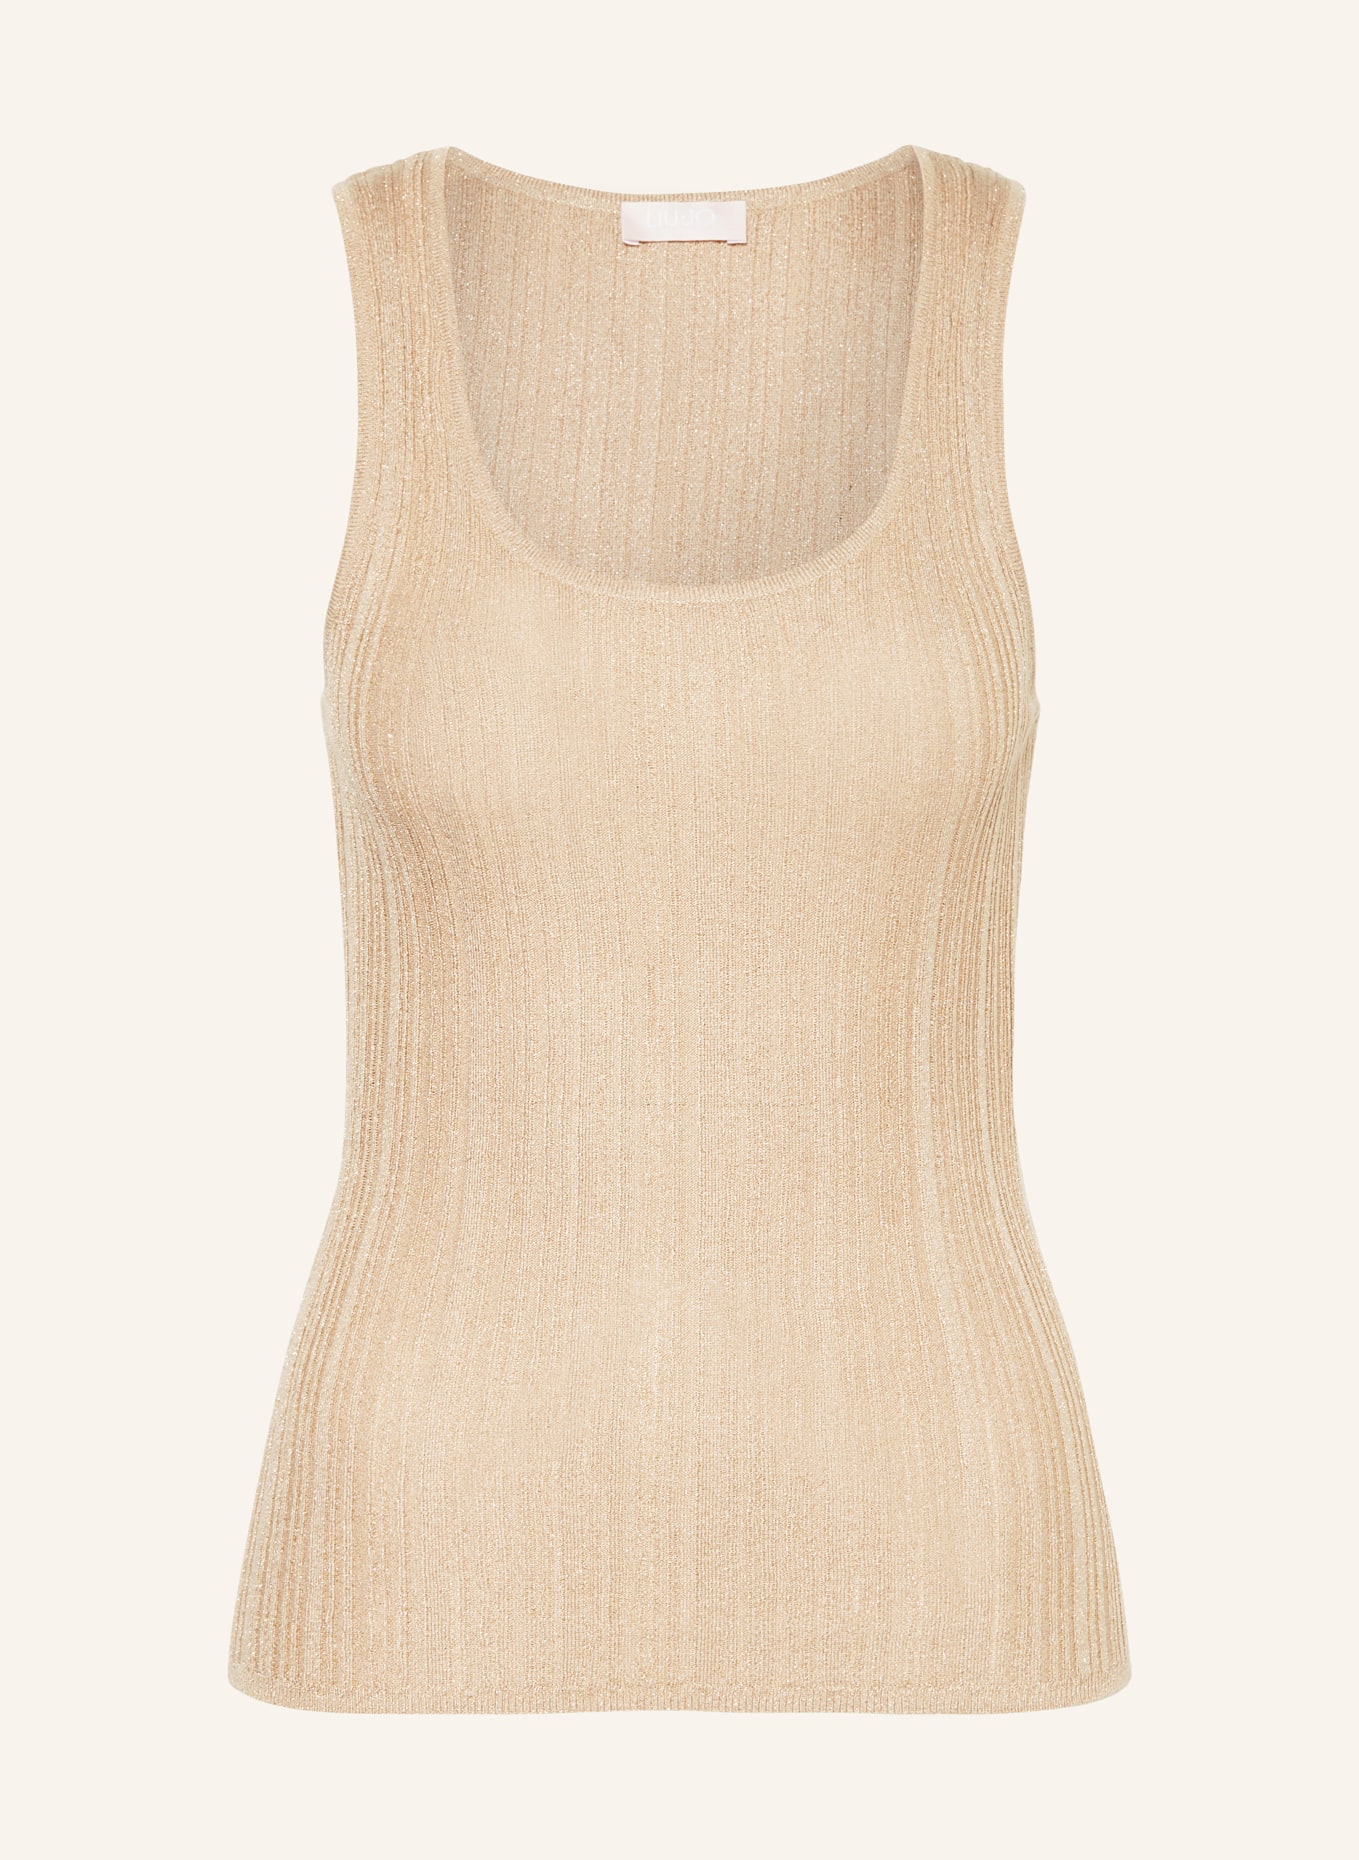 LIU JO Top with glitter thread, Color: GOLD (Image 1)